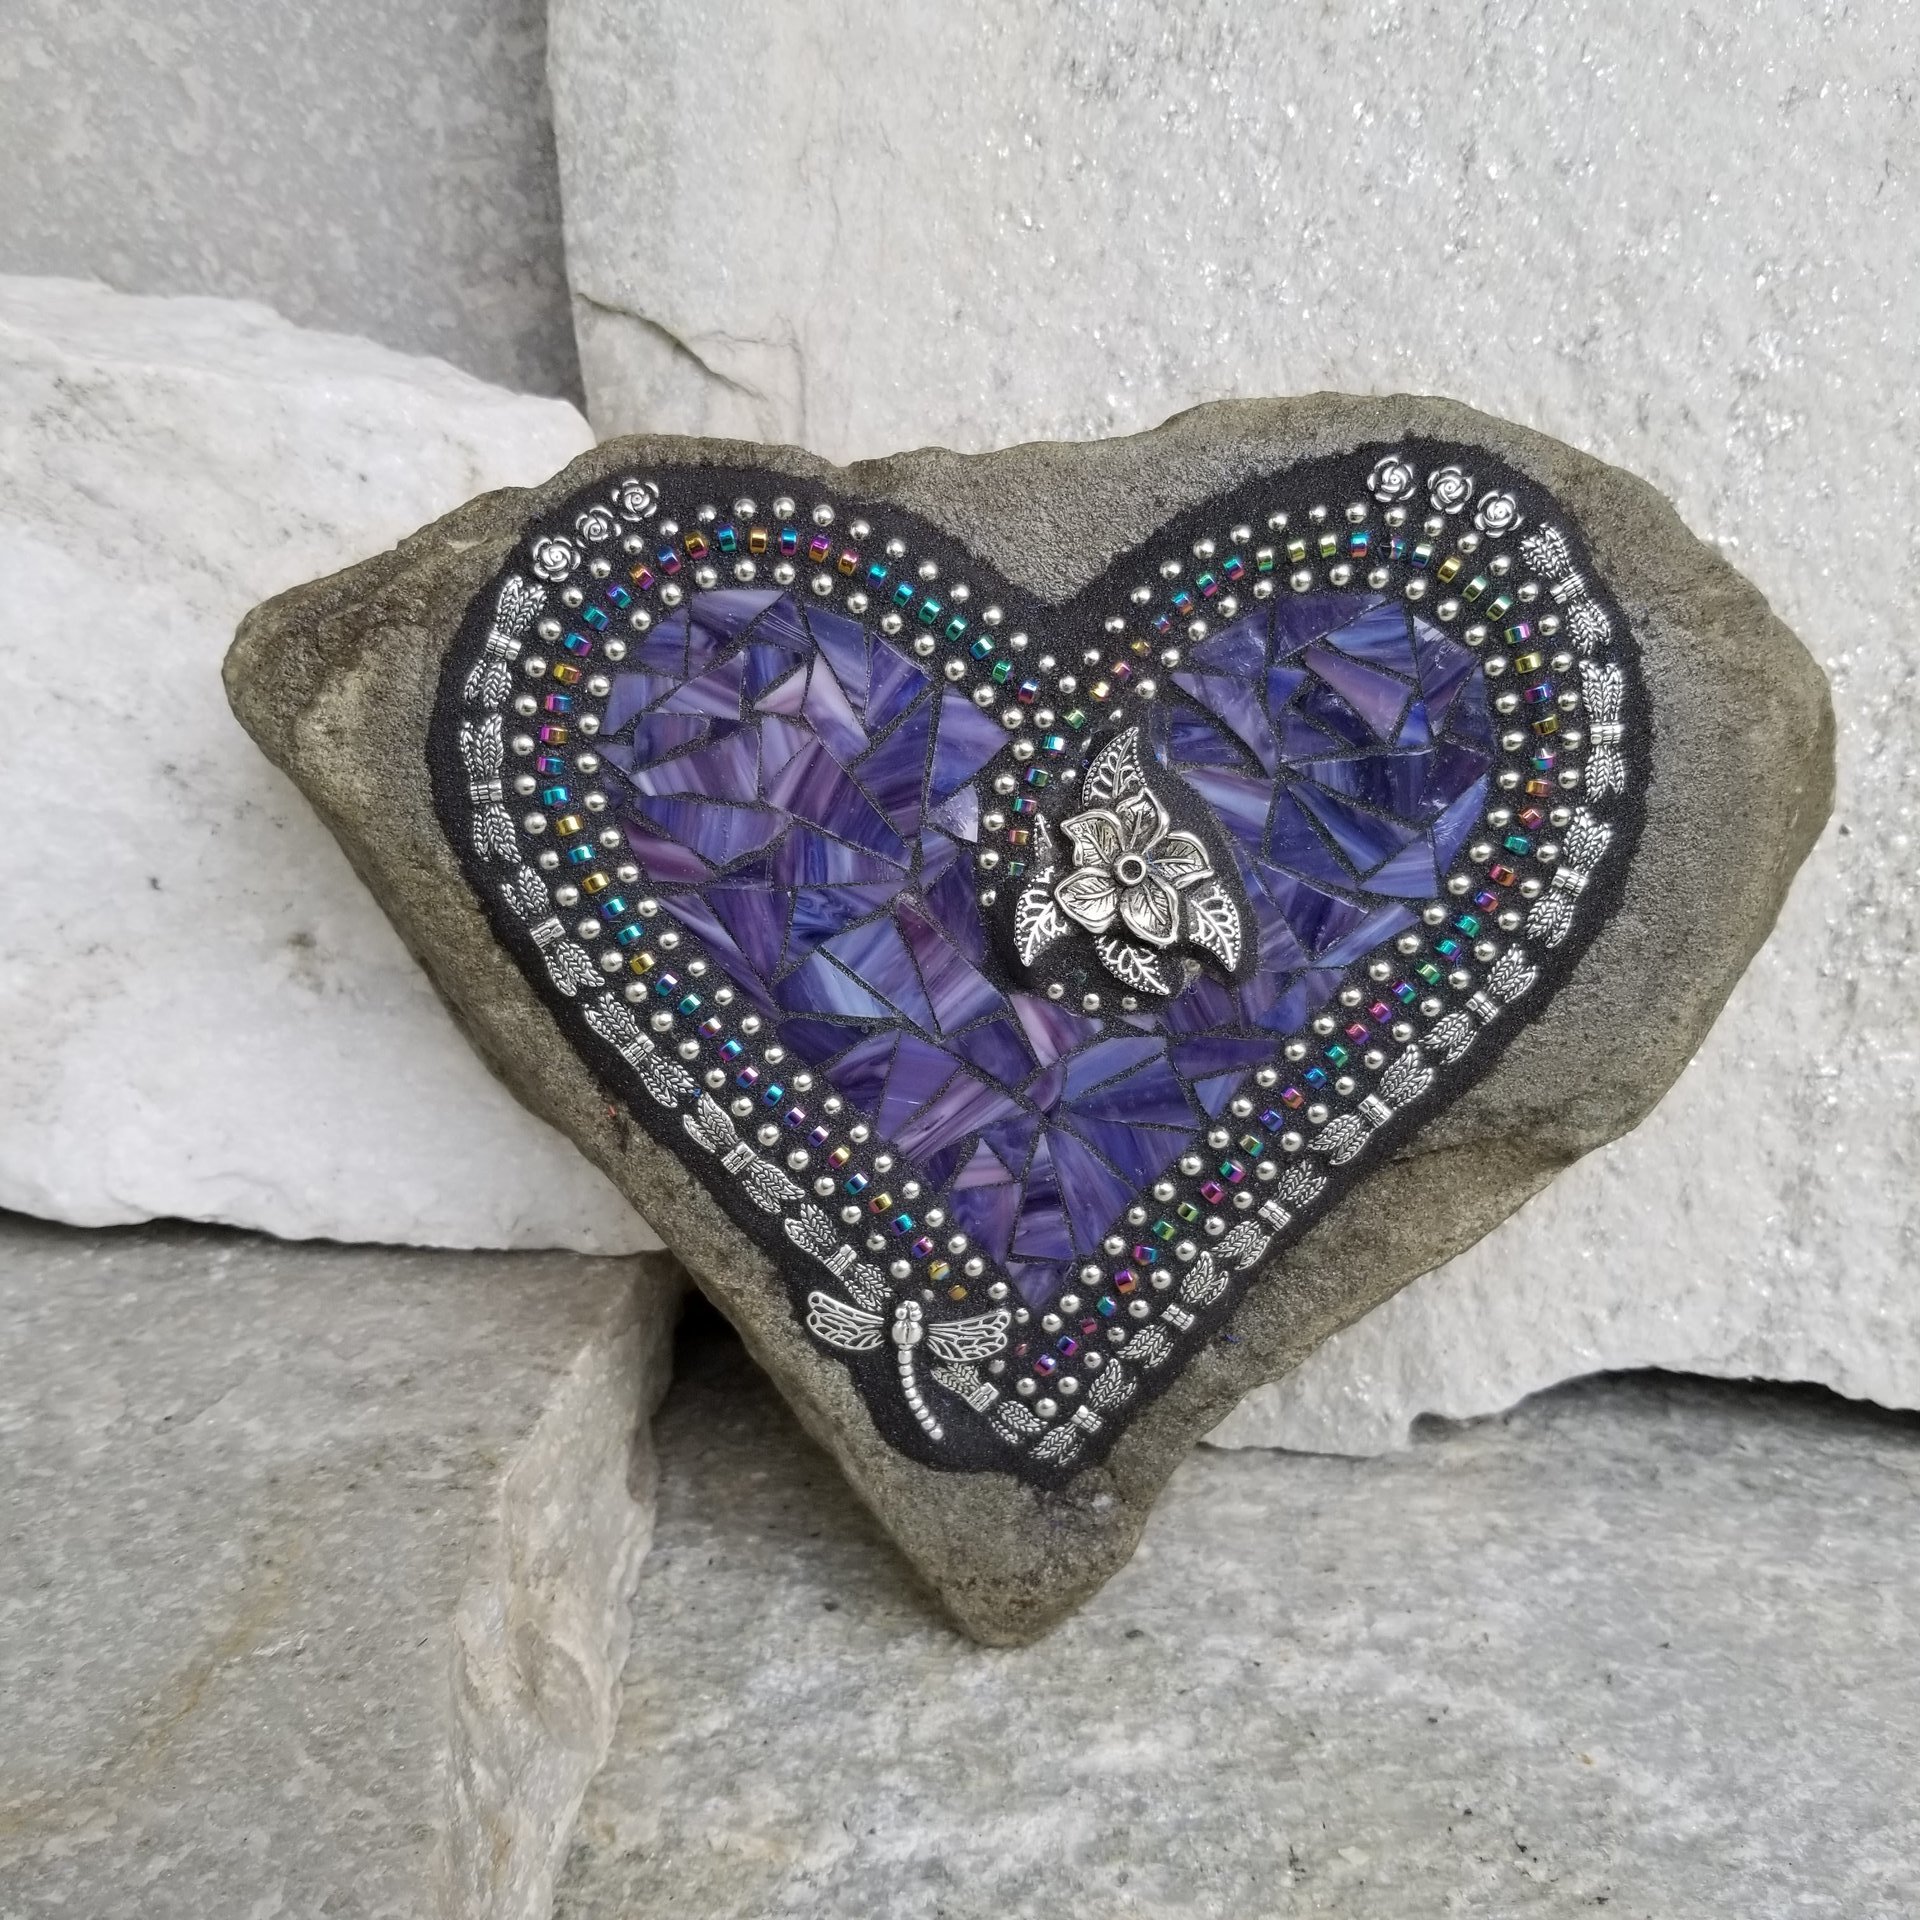 Purple Mosaic Heart Garden Stone with Dragonfly Wings